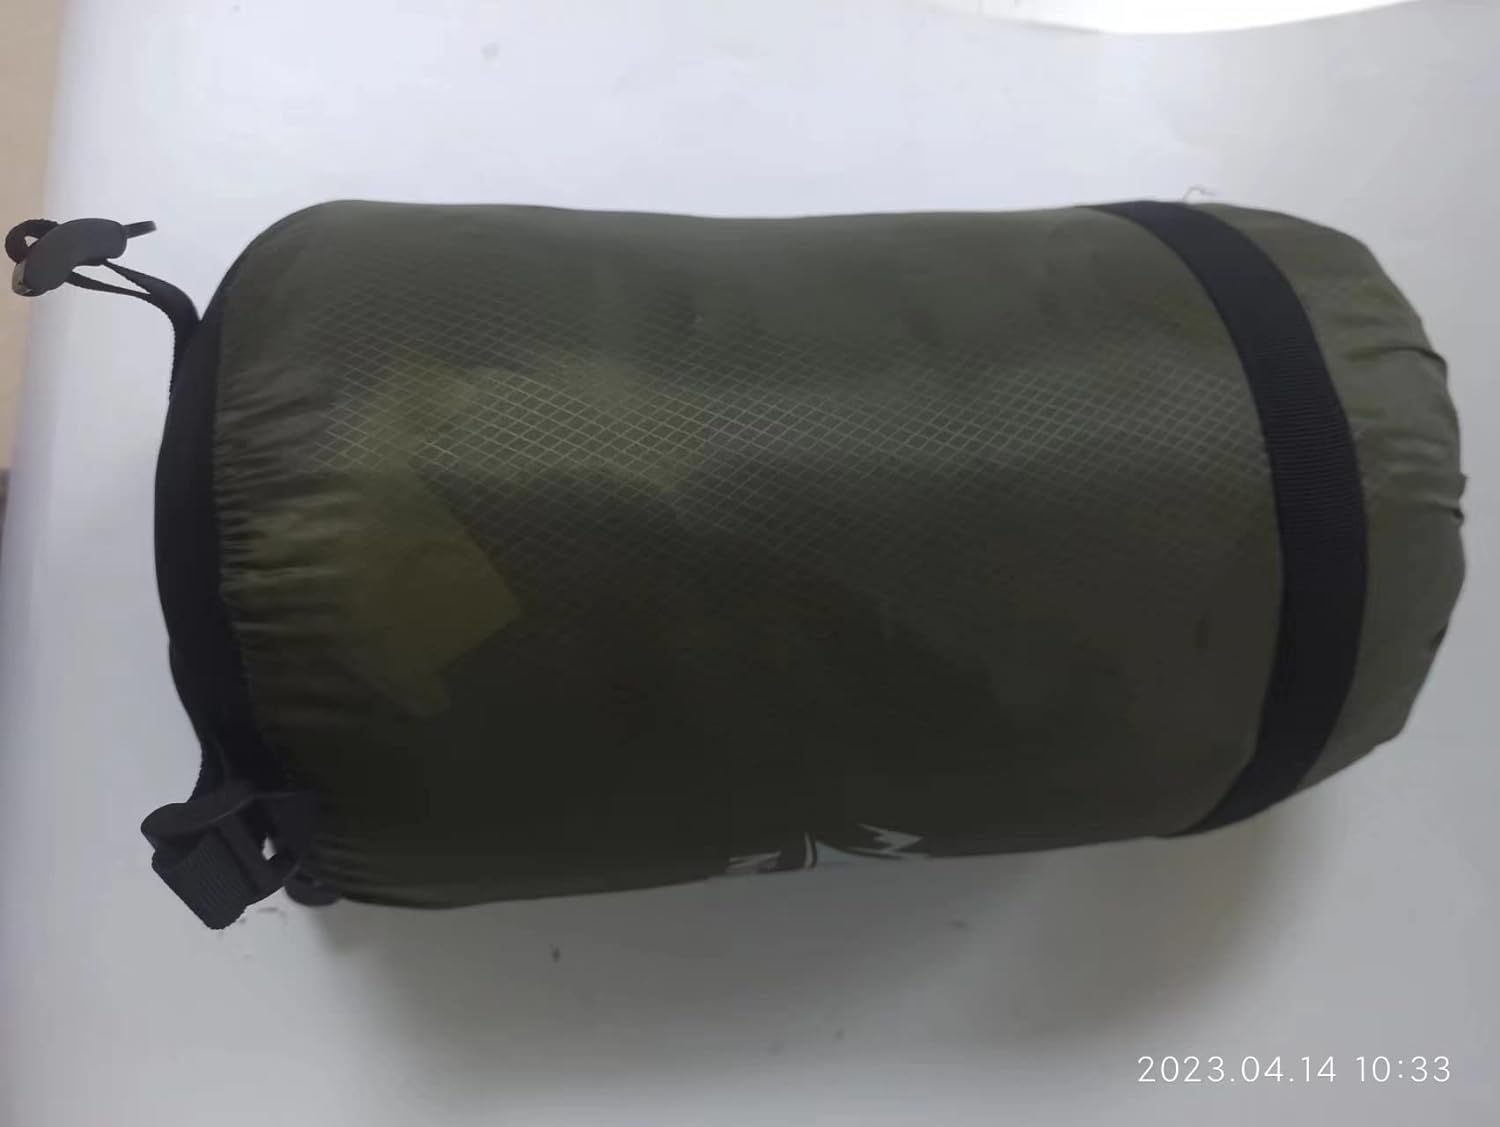 Camping Sleeping Bag for Adults 3 Seasons Portable Lightweight Backpacking Hiking Traveling Indoor Outdoor Temperature 5-15℃ 2.6X6.3Ft Switch to a Quilt or Blanket